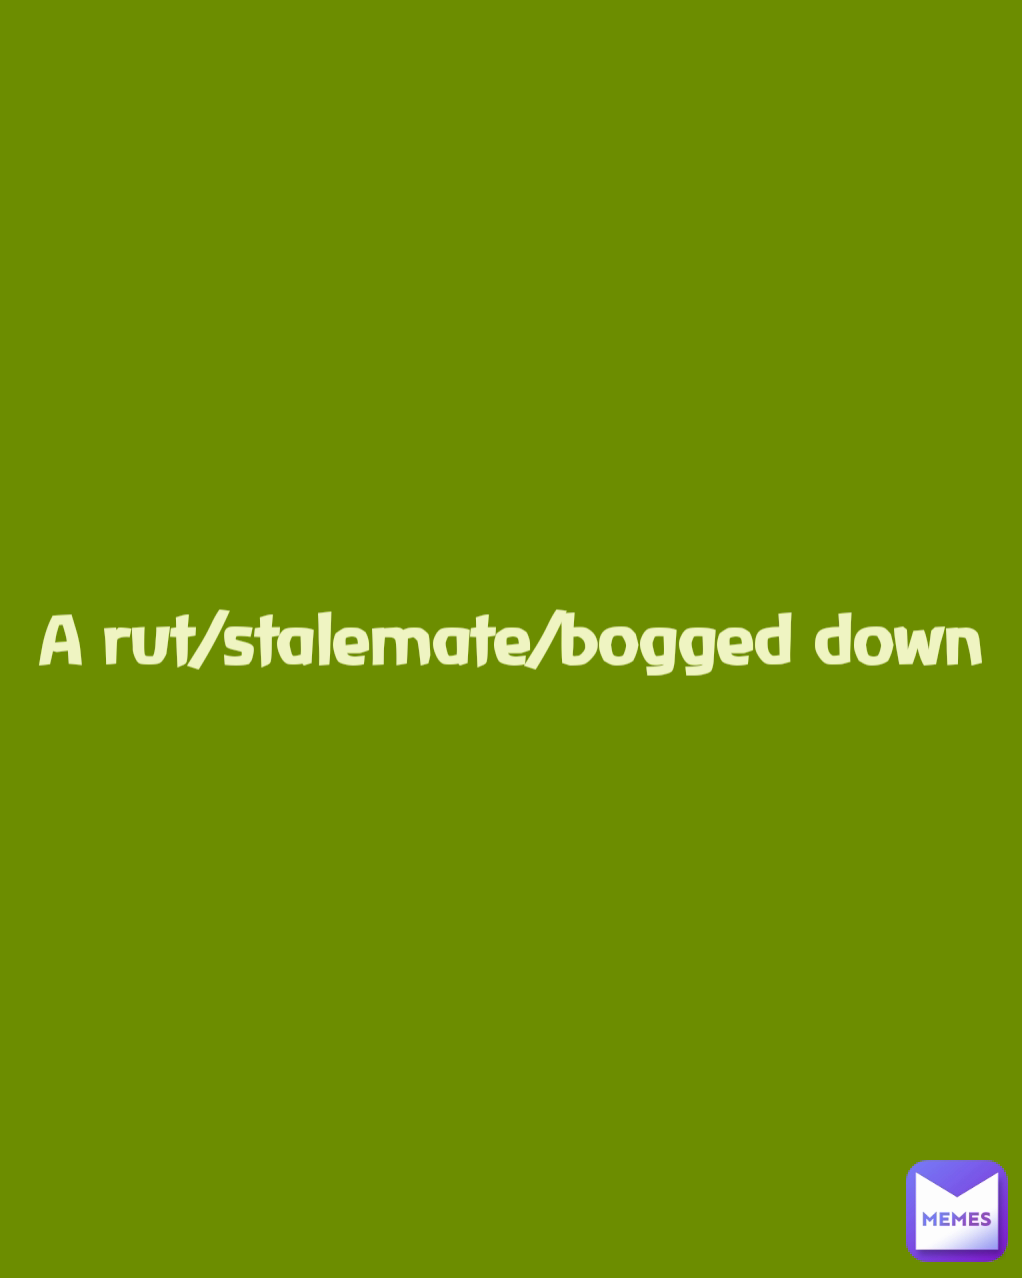 

A rut/stalemate/bogged down

